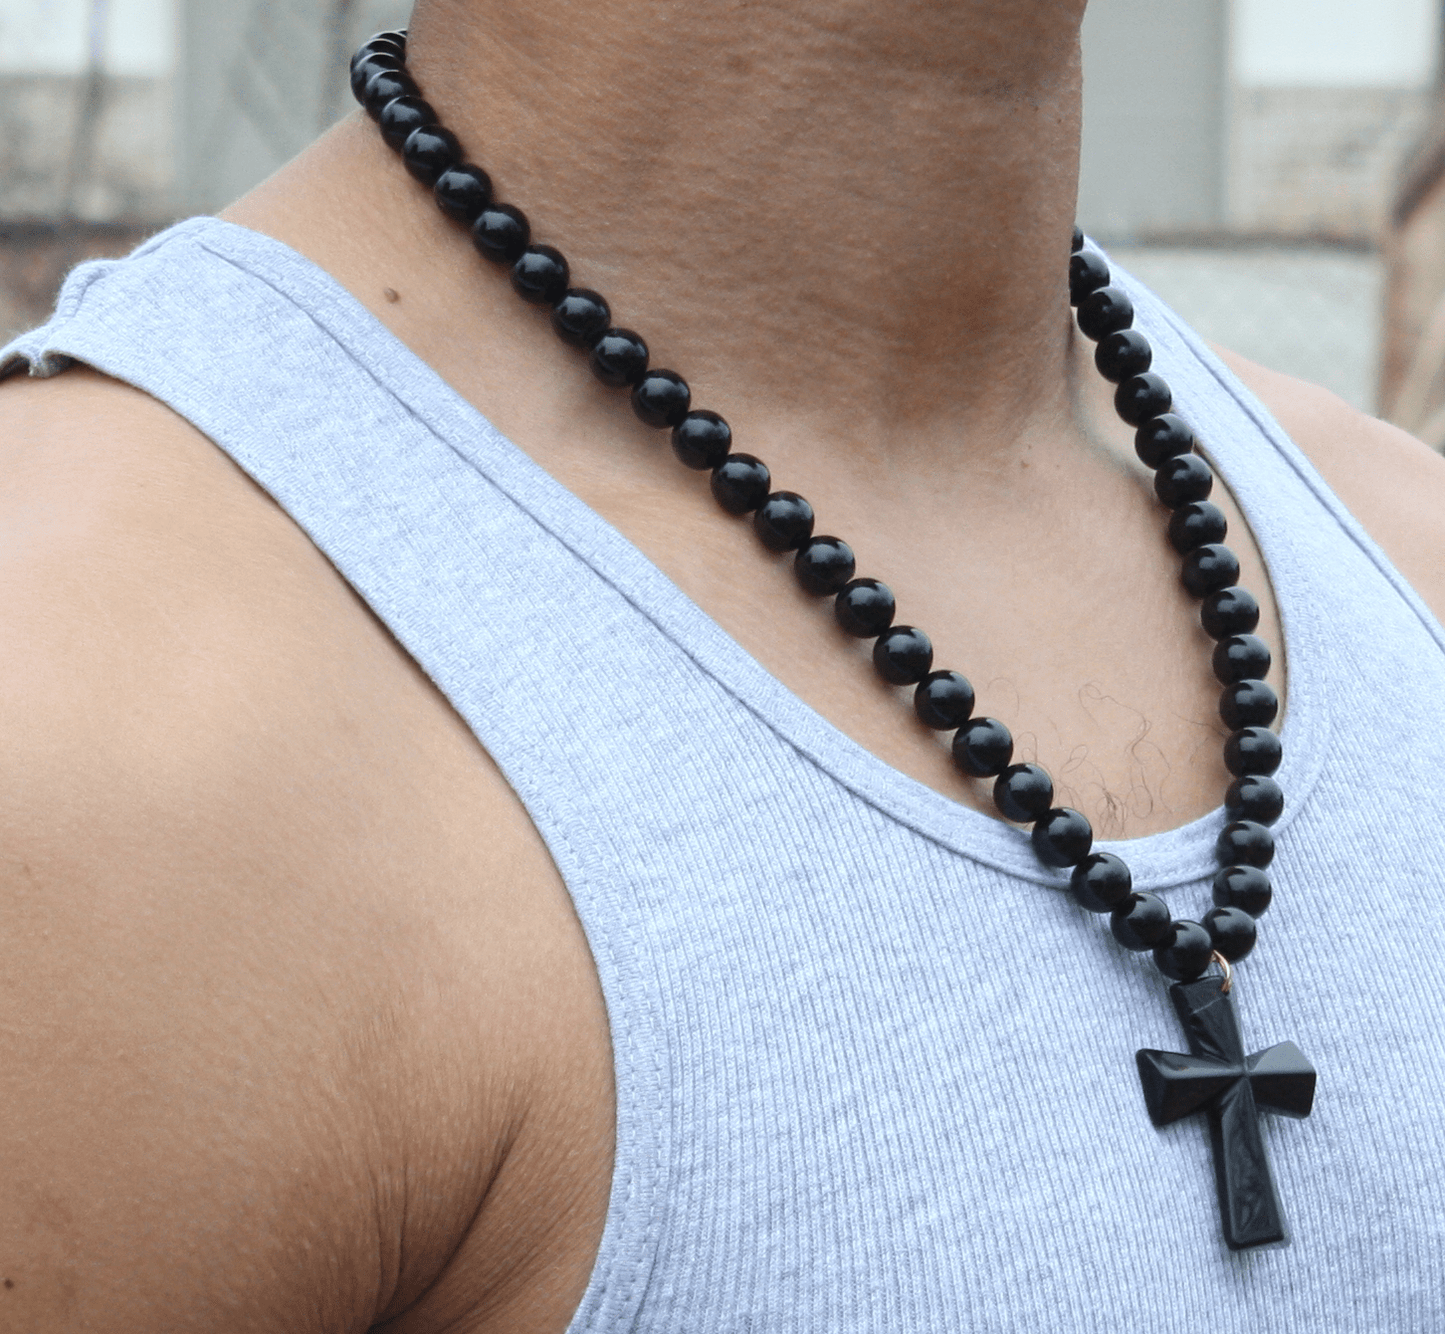 Genuine Black Onyx Necklace with Black Onyx Cross - Gift for Men/Woman - Spiritual Accessories - Religious Symbol